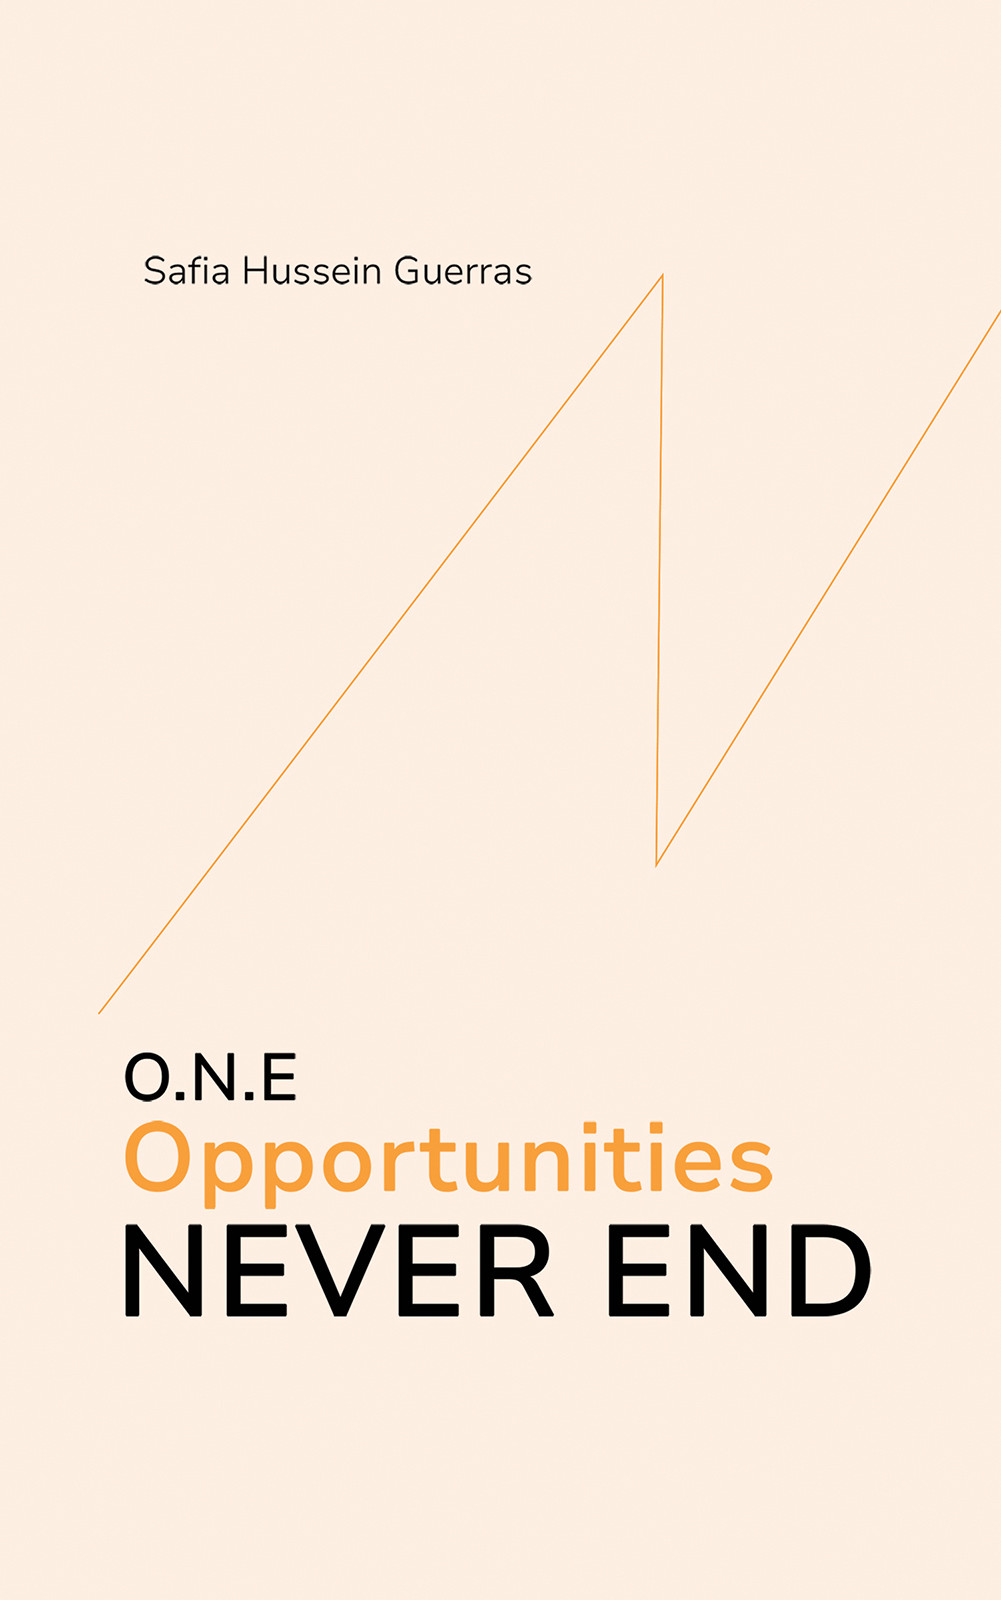 O.N.E - Opportunities Never End